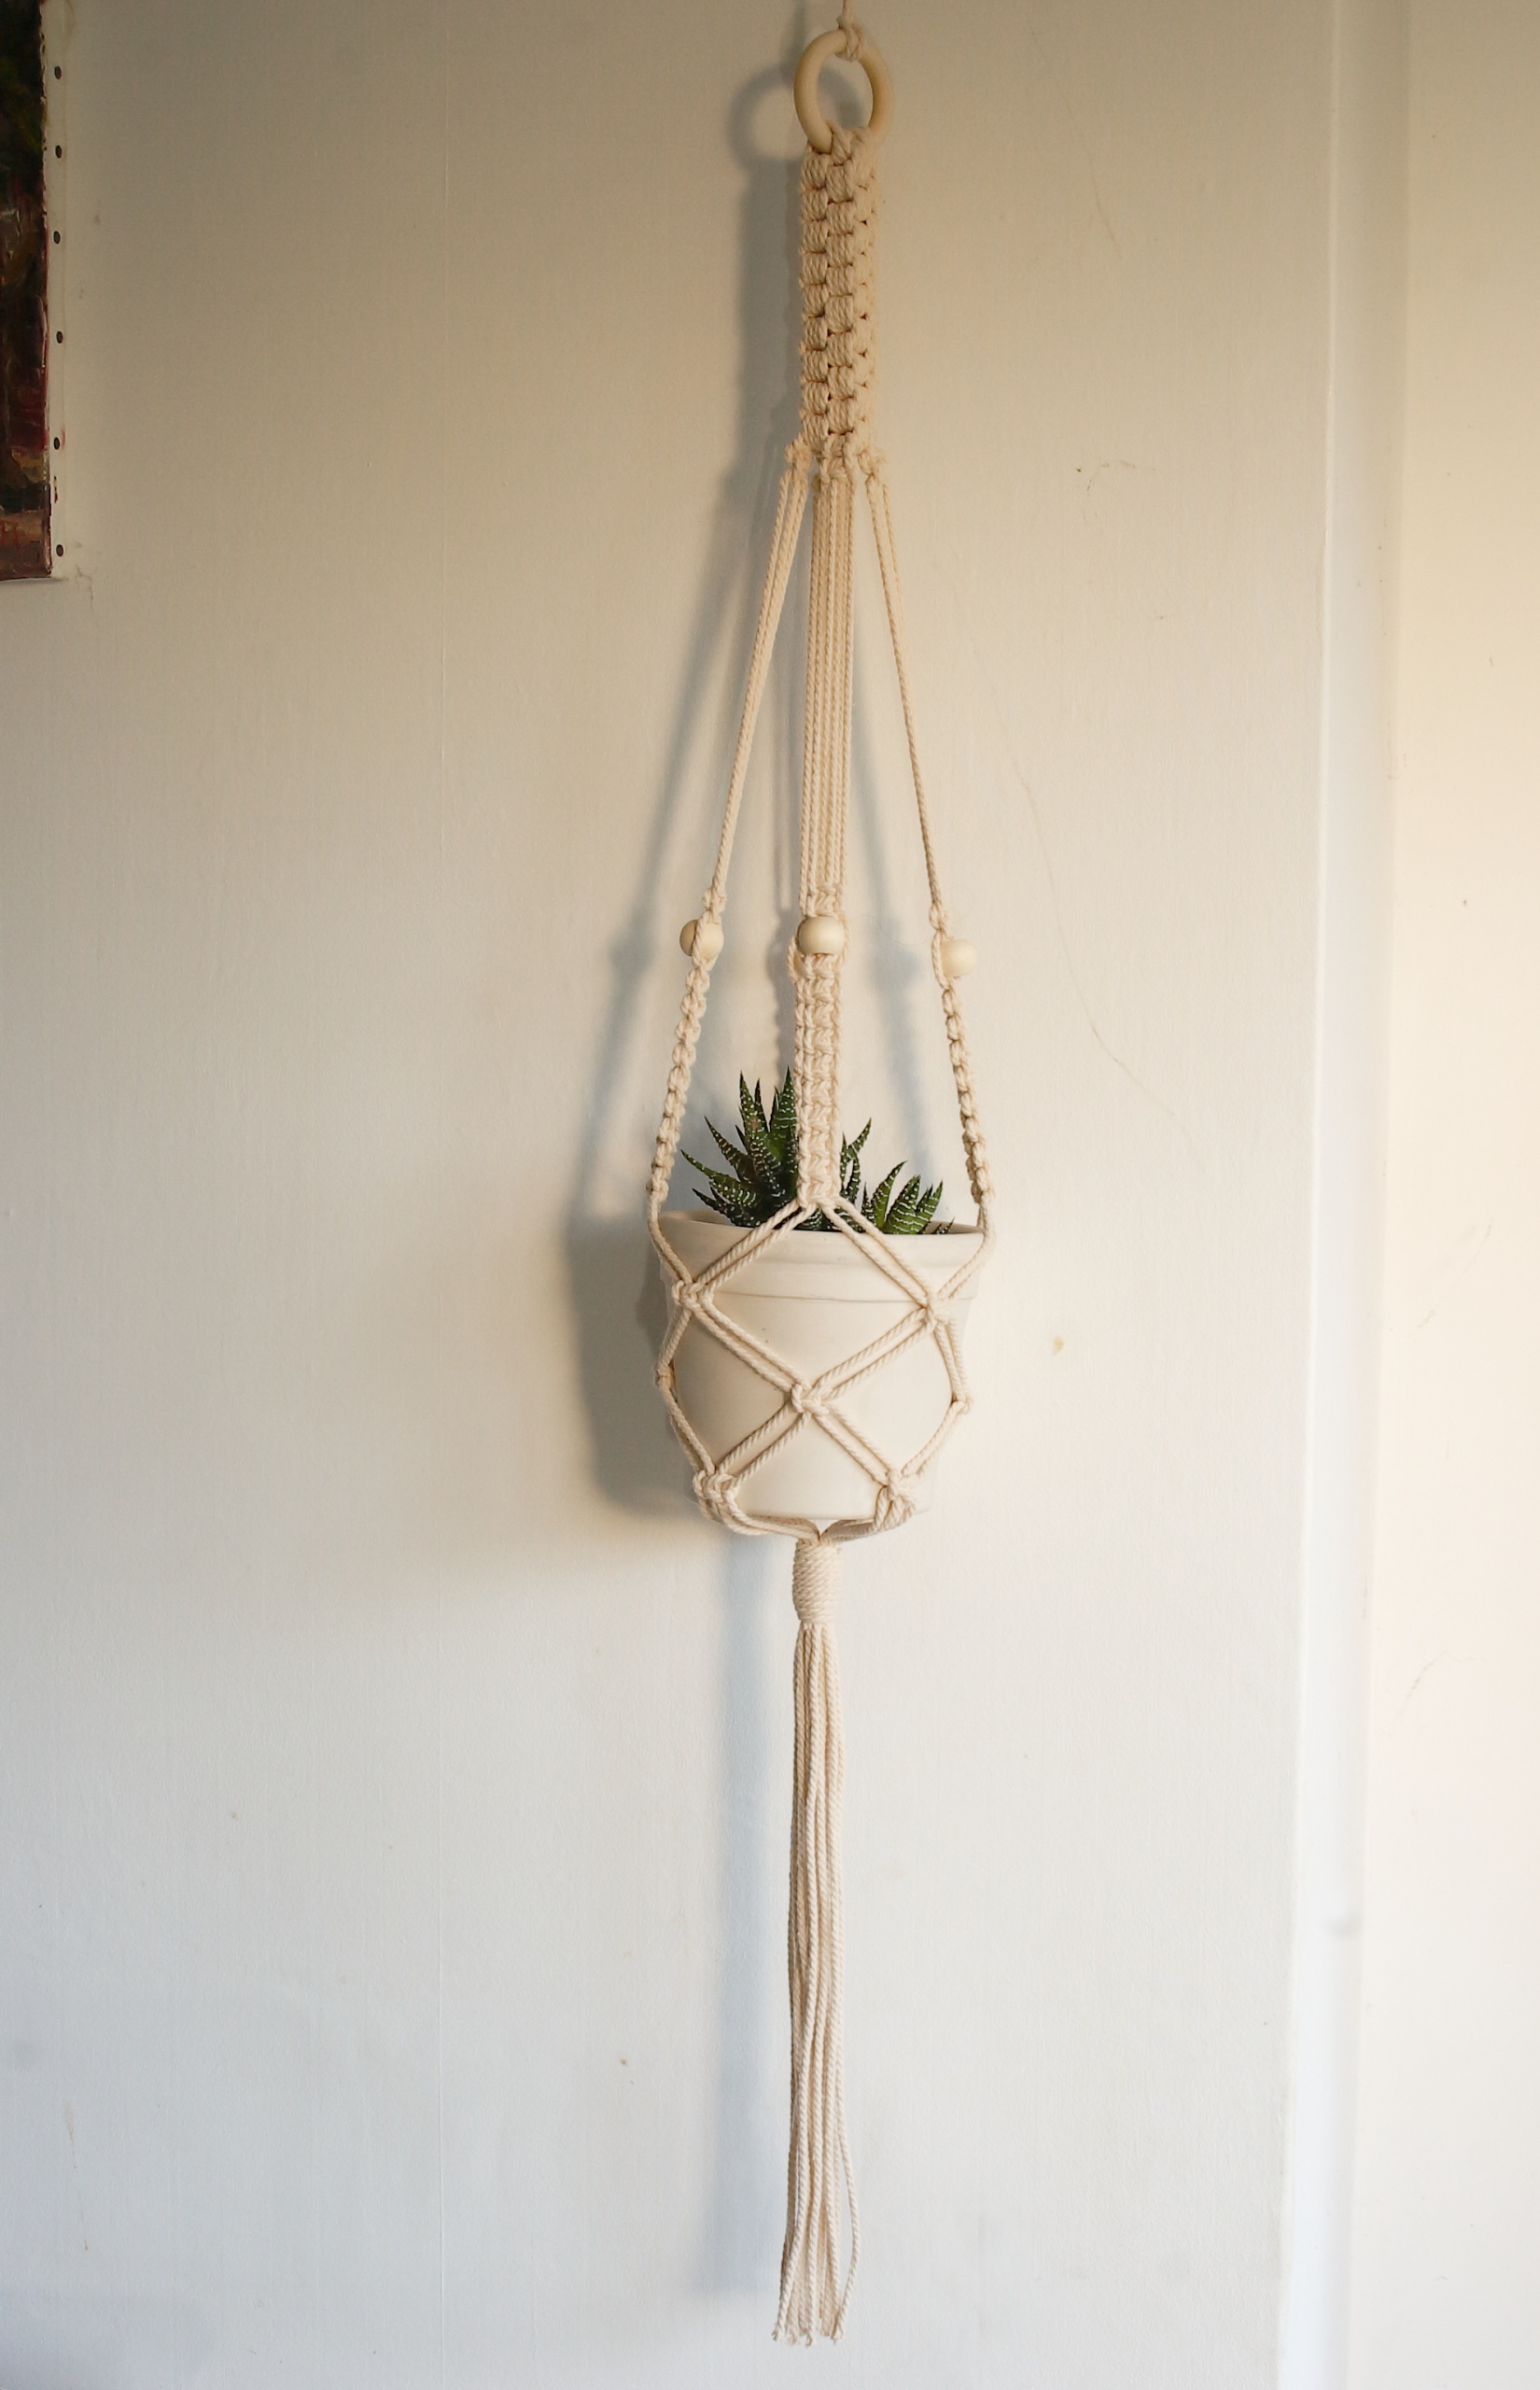 Handcrafted Macrame Plant Hanger with Ecru Cotton Cord – Amanda Tamsin